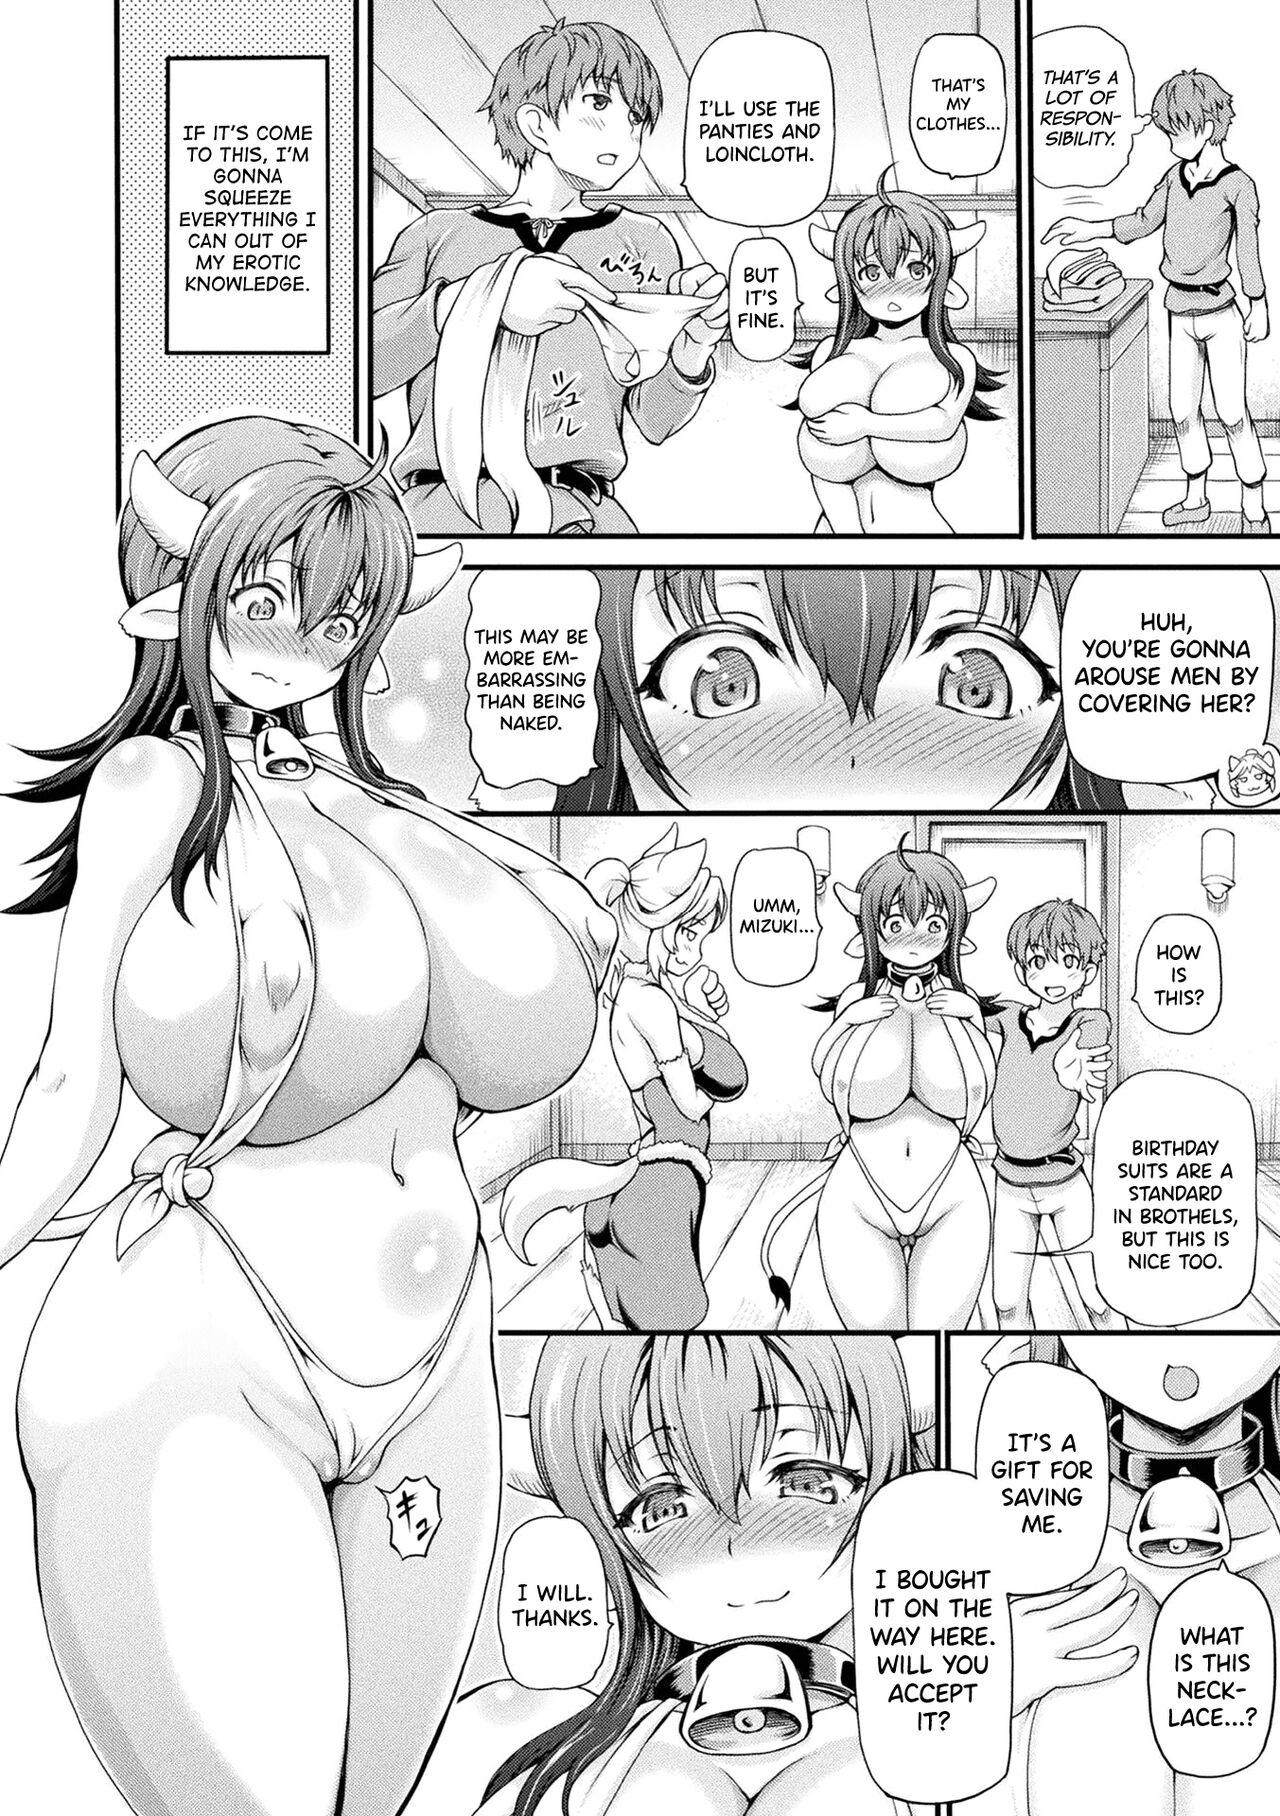 Jerking Off Isekai Shoukan Ch.1-2 Mexicano - Page 6